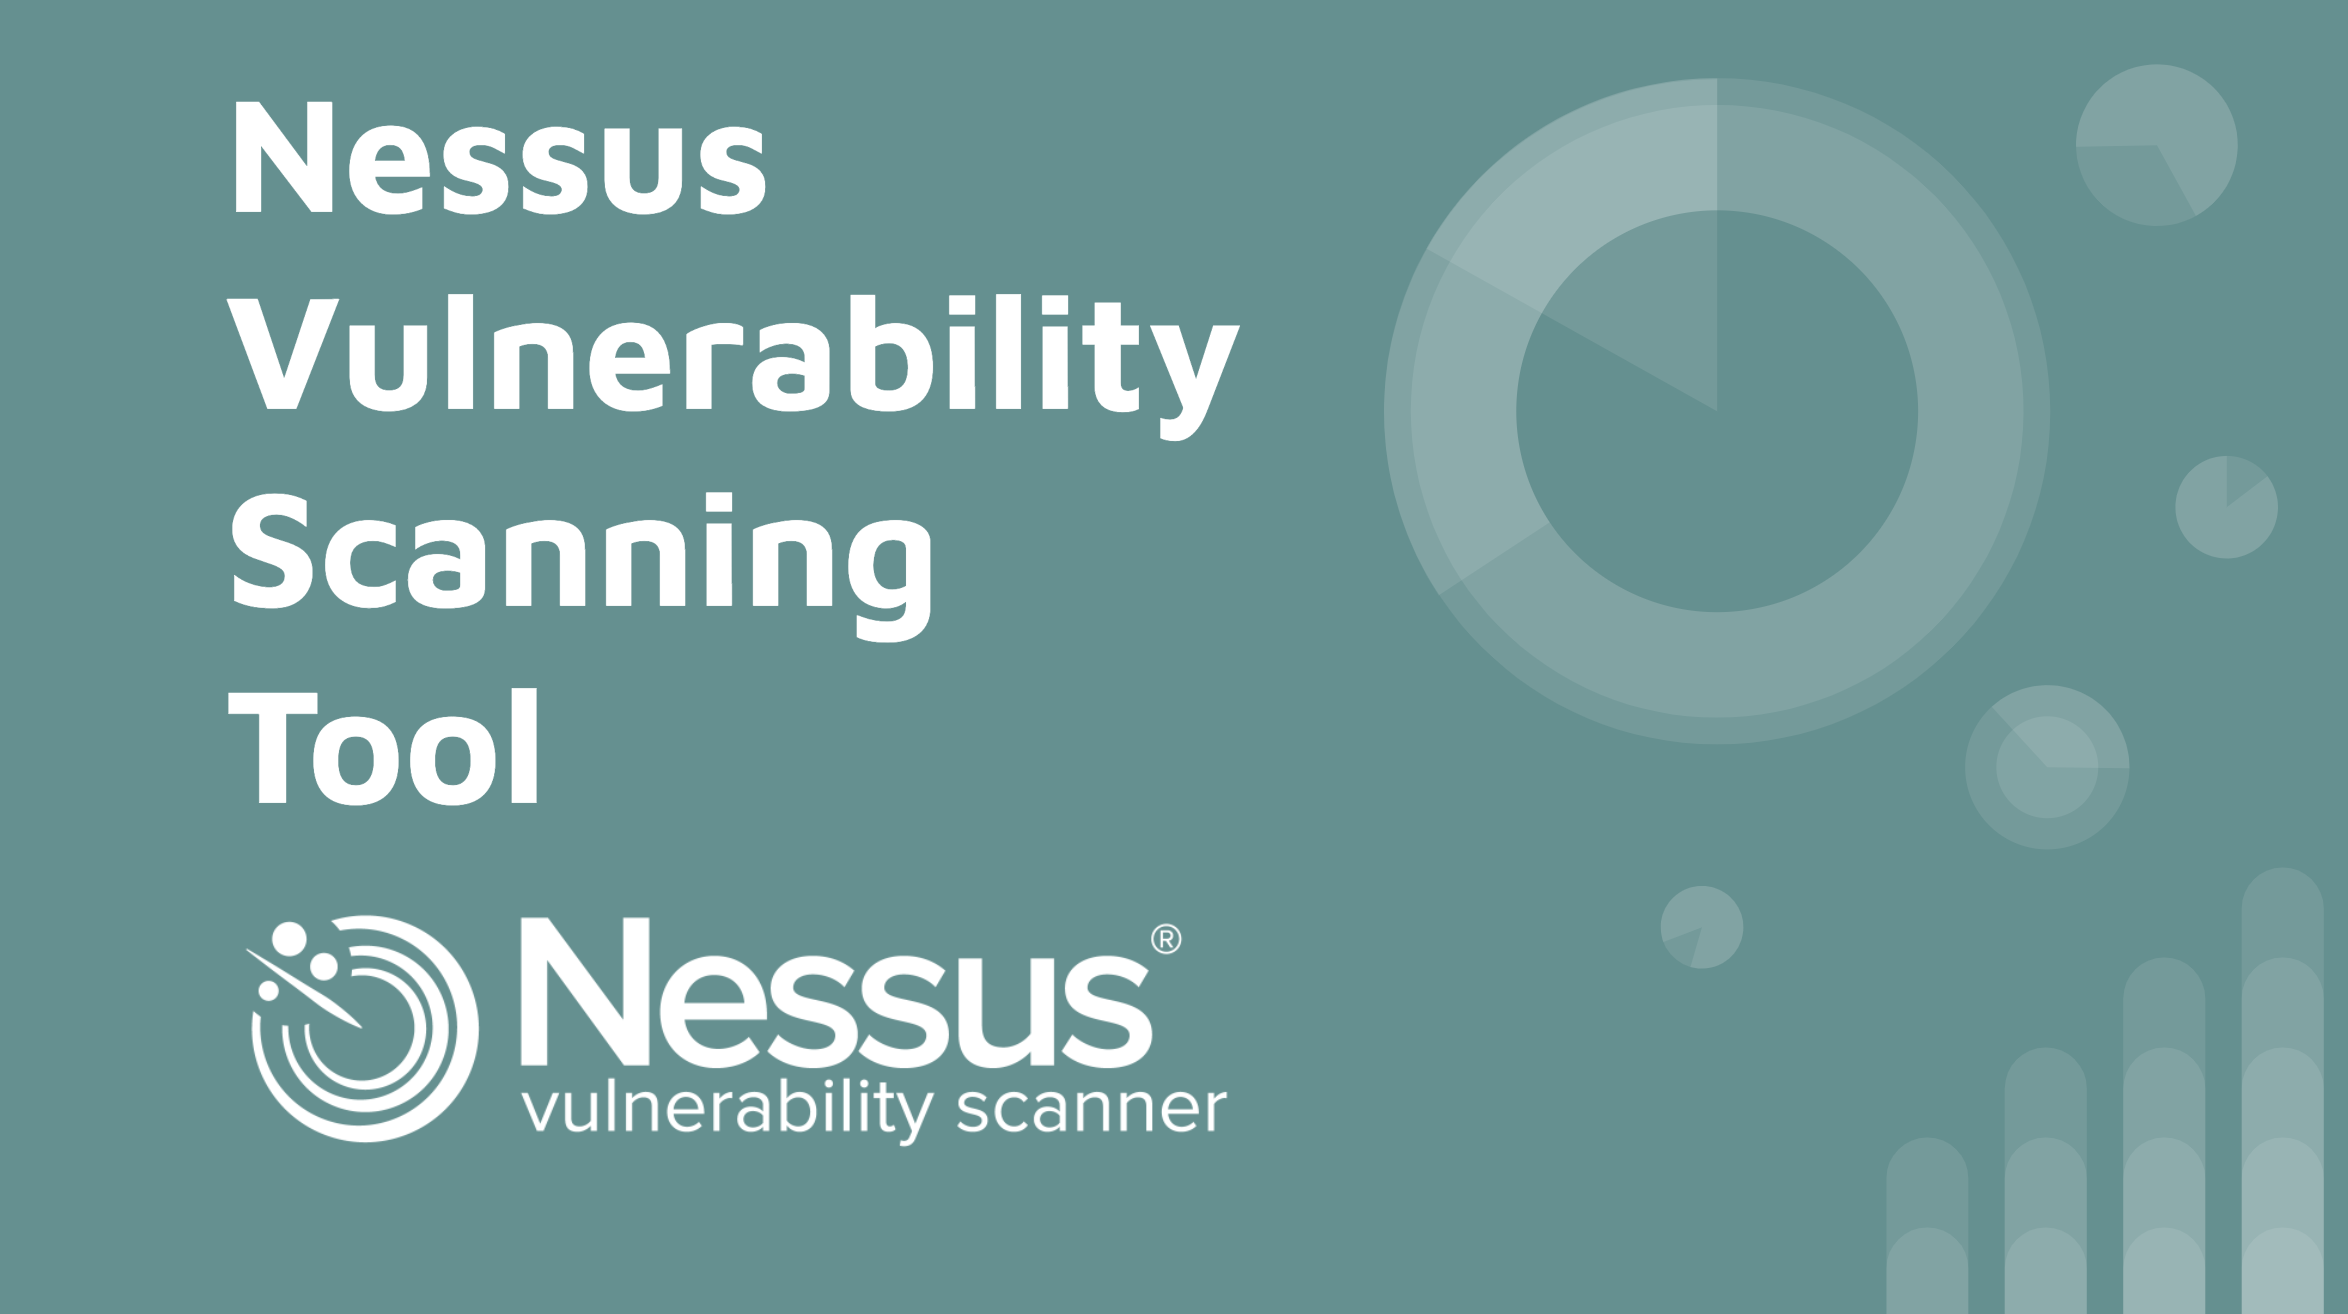 What is the Nessus vulnerability scanning platform?